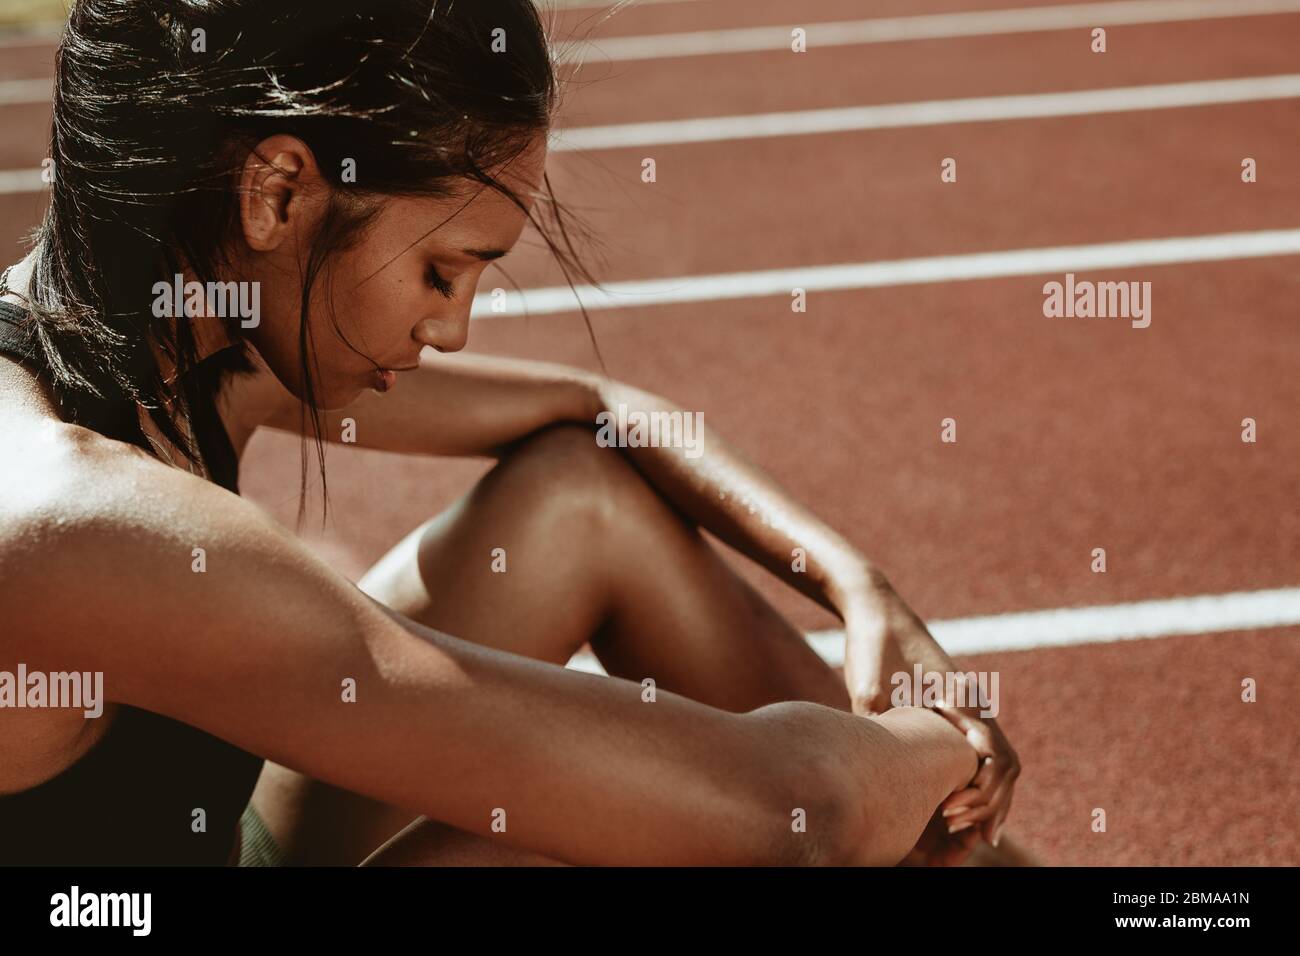 Female runner looking tired after workout session. Sportswoman feeling exhausted after a training session at running track. Stock Photo